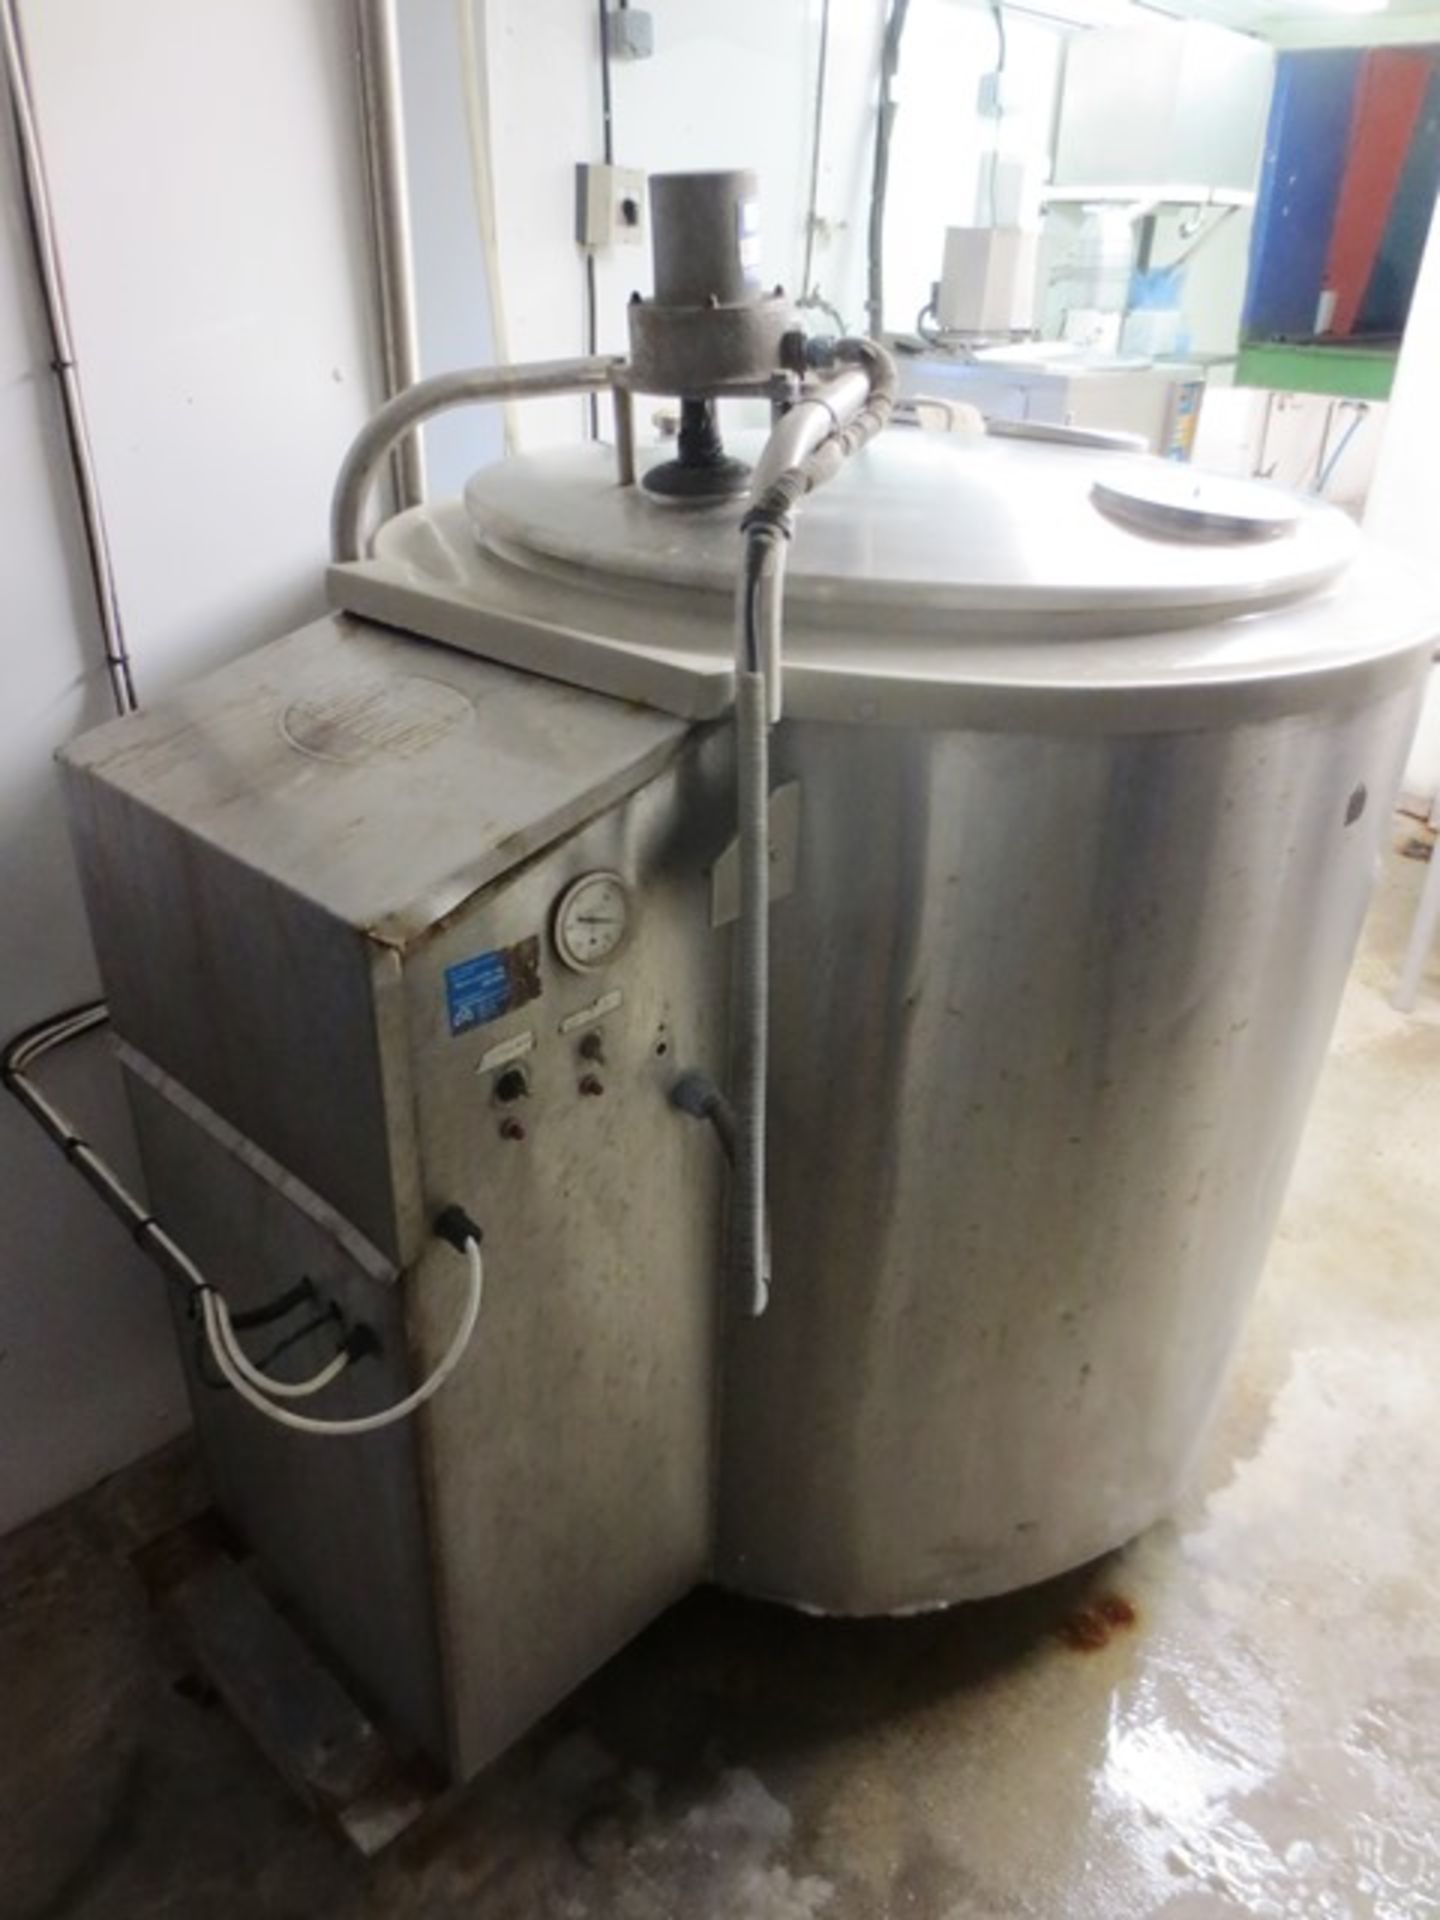 Dari-kool stainless steel jacketed mixing tank with single agitator, approx 900mm - Image 2 of 4